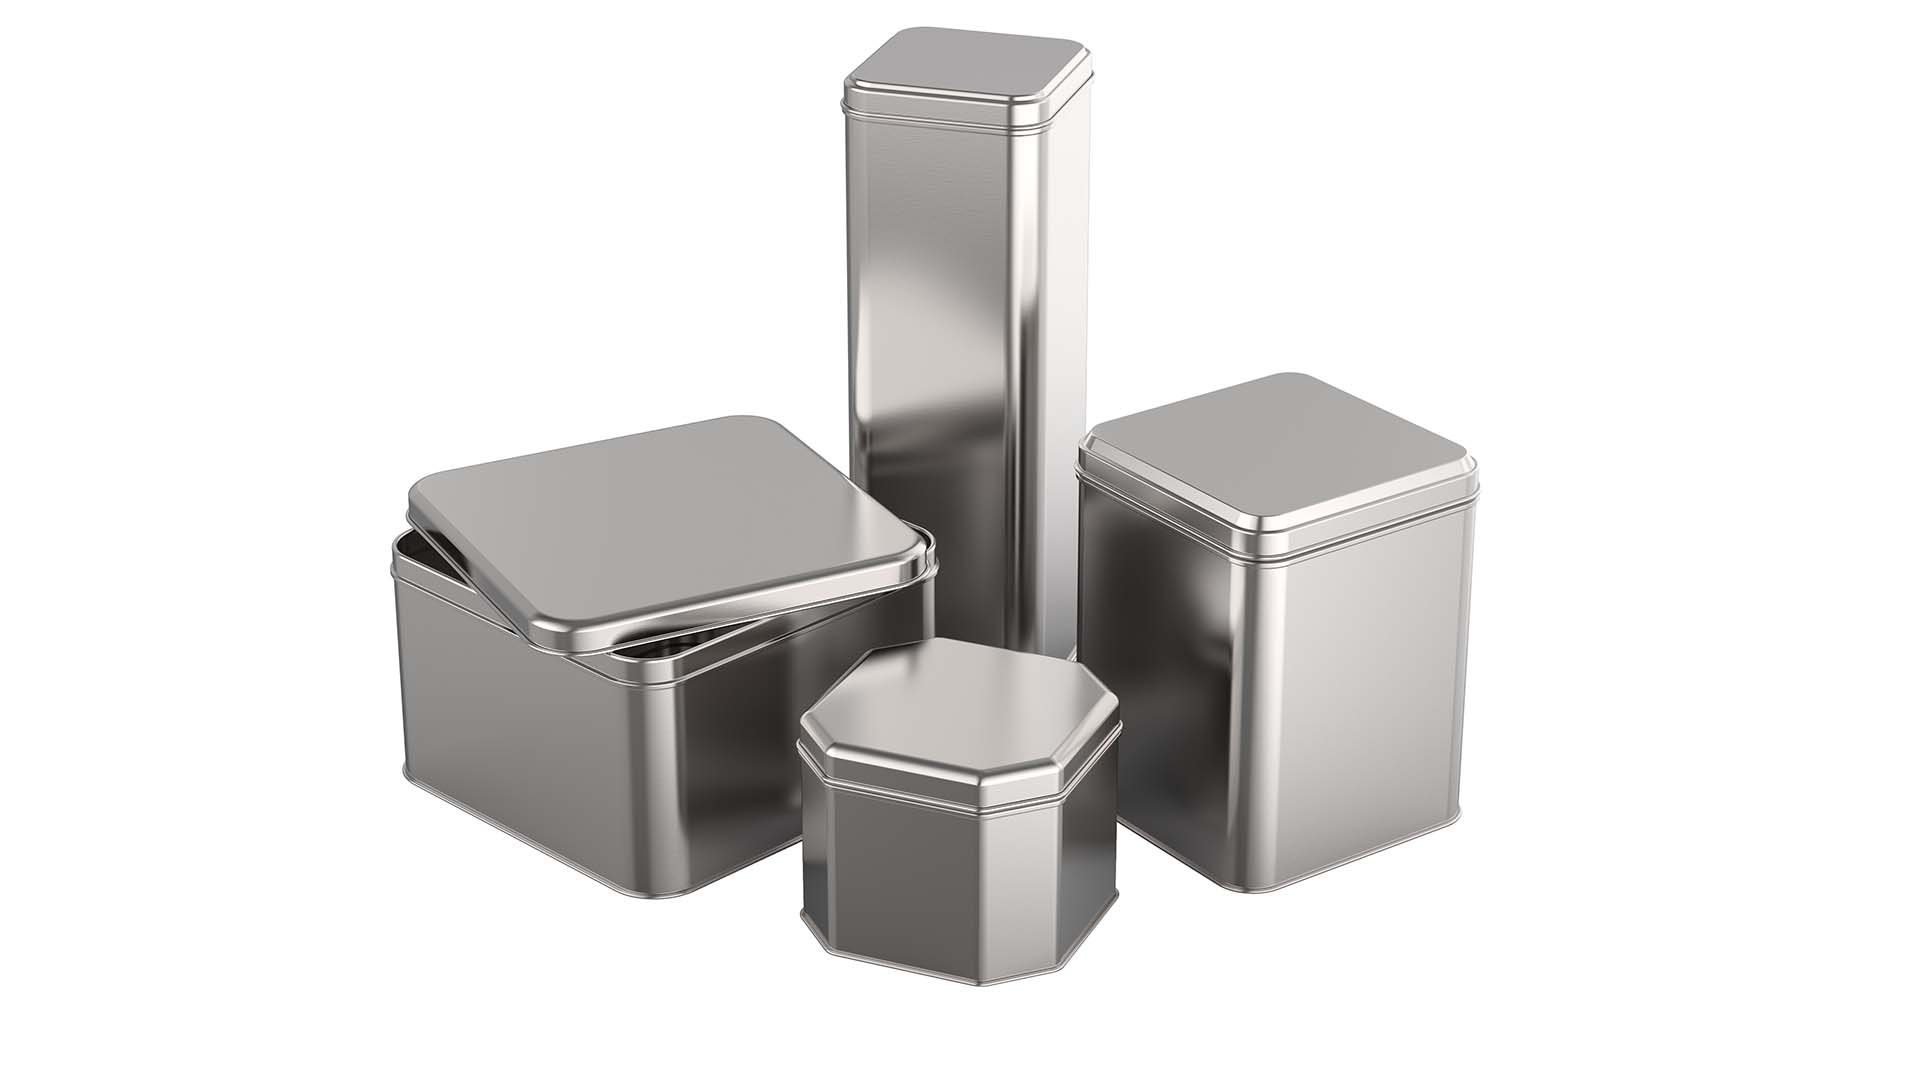 A collection of different sized square tins standing next to each other.